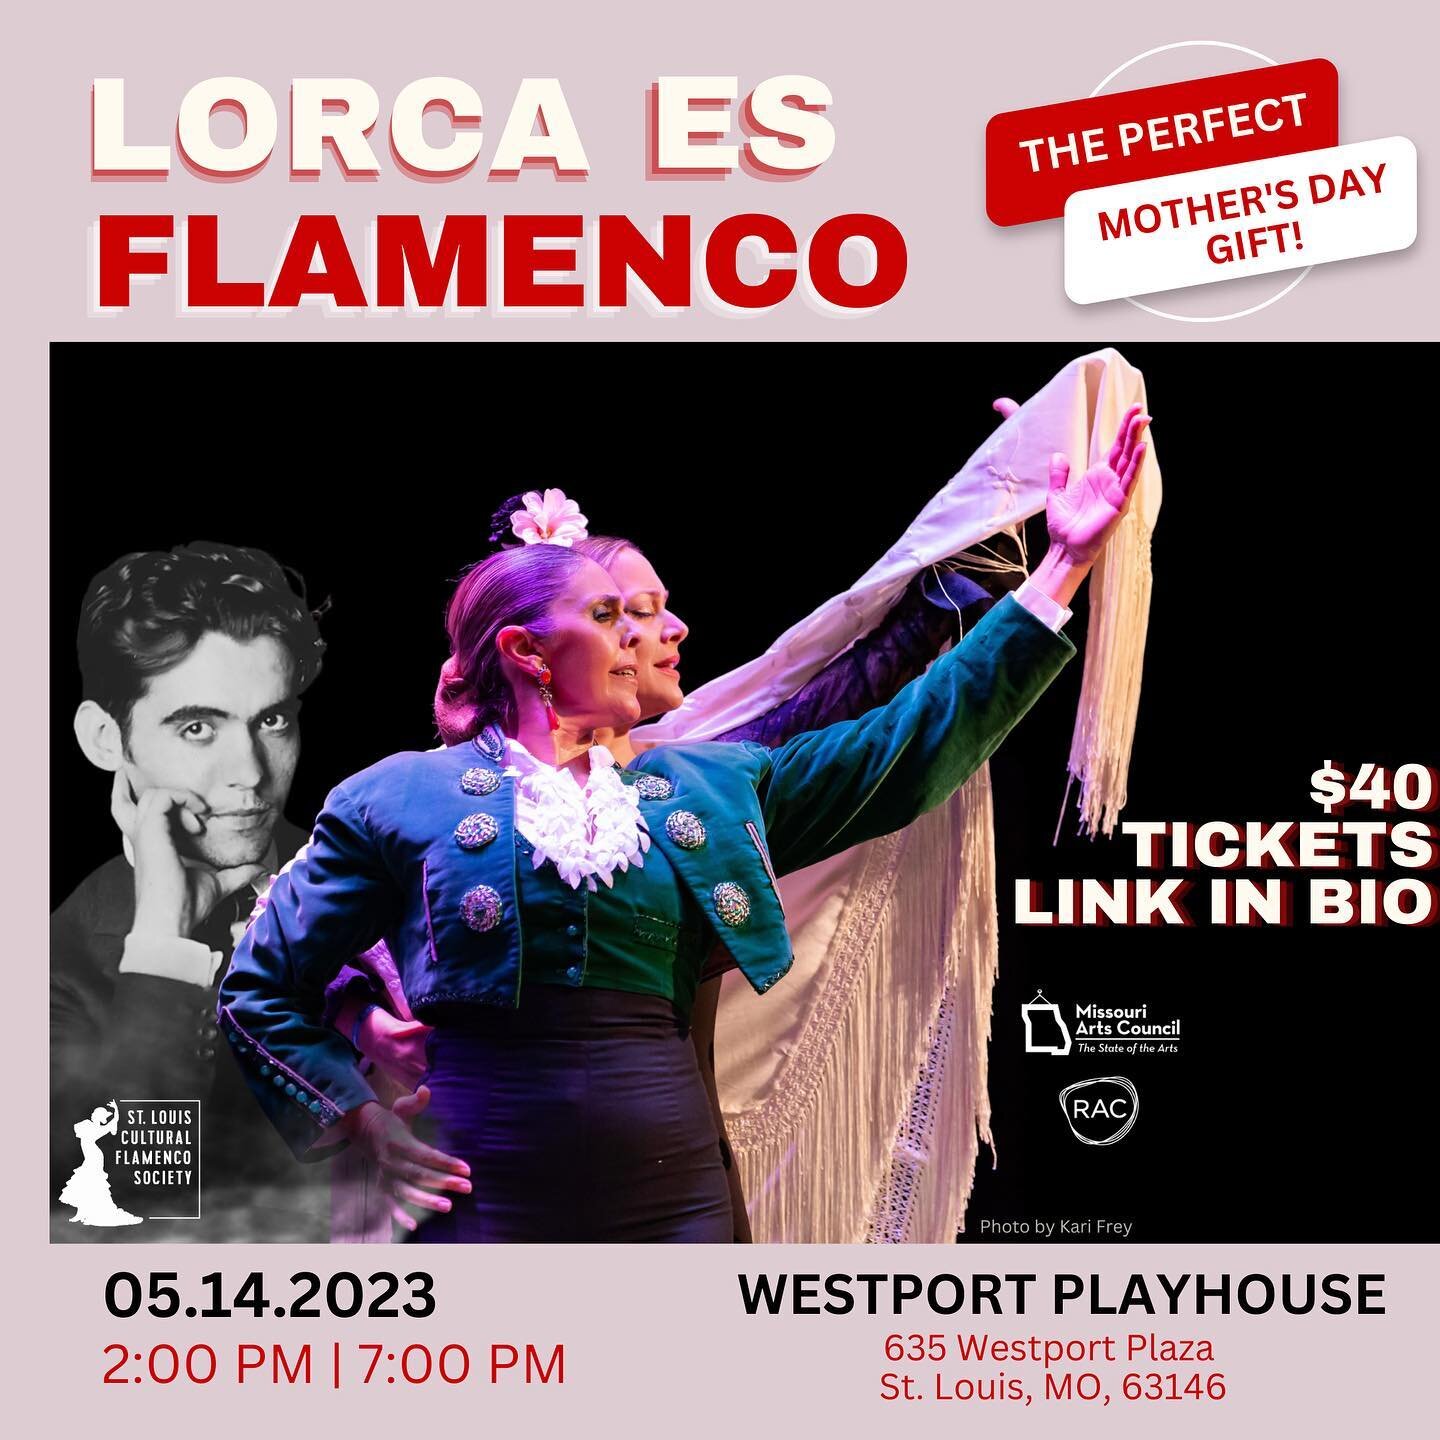 Join us for Lorca Es Flamenco on Sunday, May 14 at 2pm and 7pm at @westportplayhouse at @westportsocial 💃 TICKETS FOR SALE IN LINK IN BIO! 

#stlflamenco #flamencodance #flamencoshow #stlouis #stl #stldance